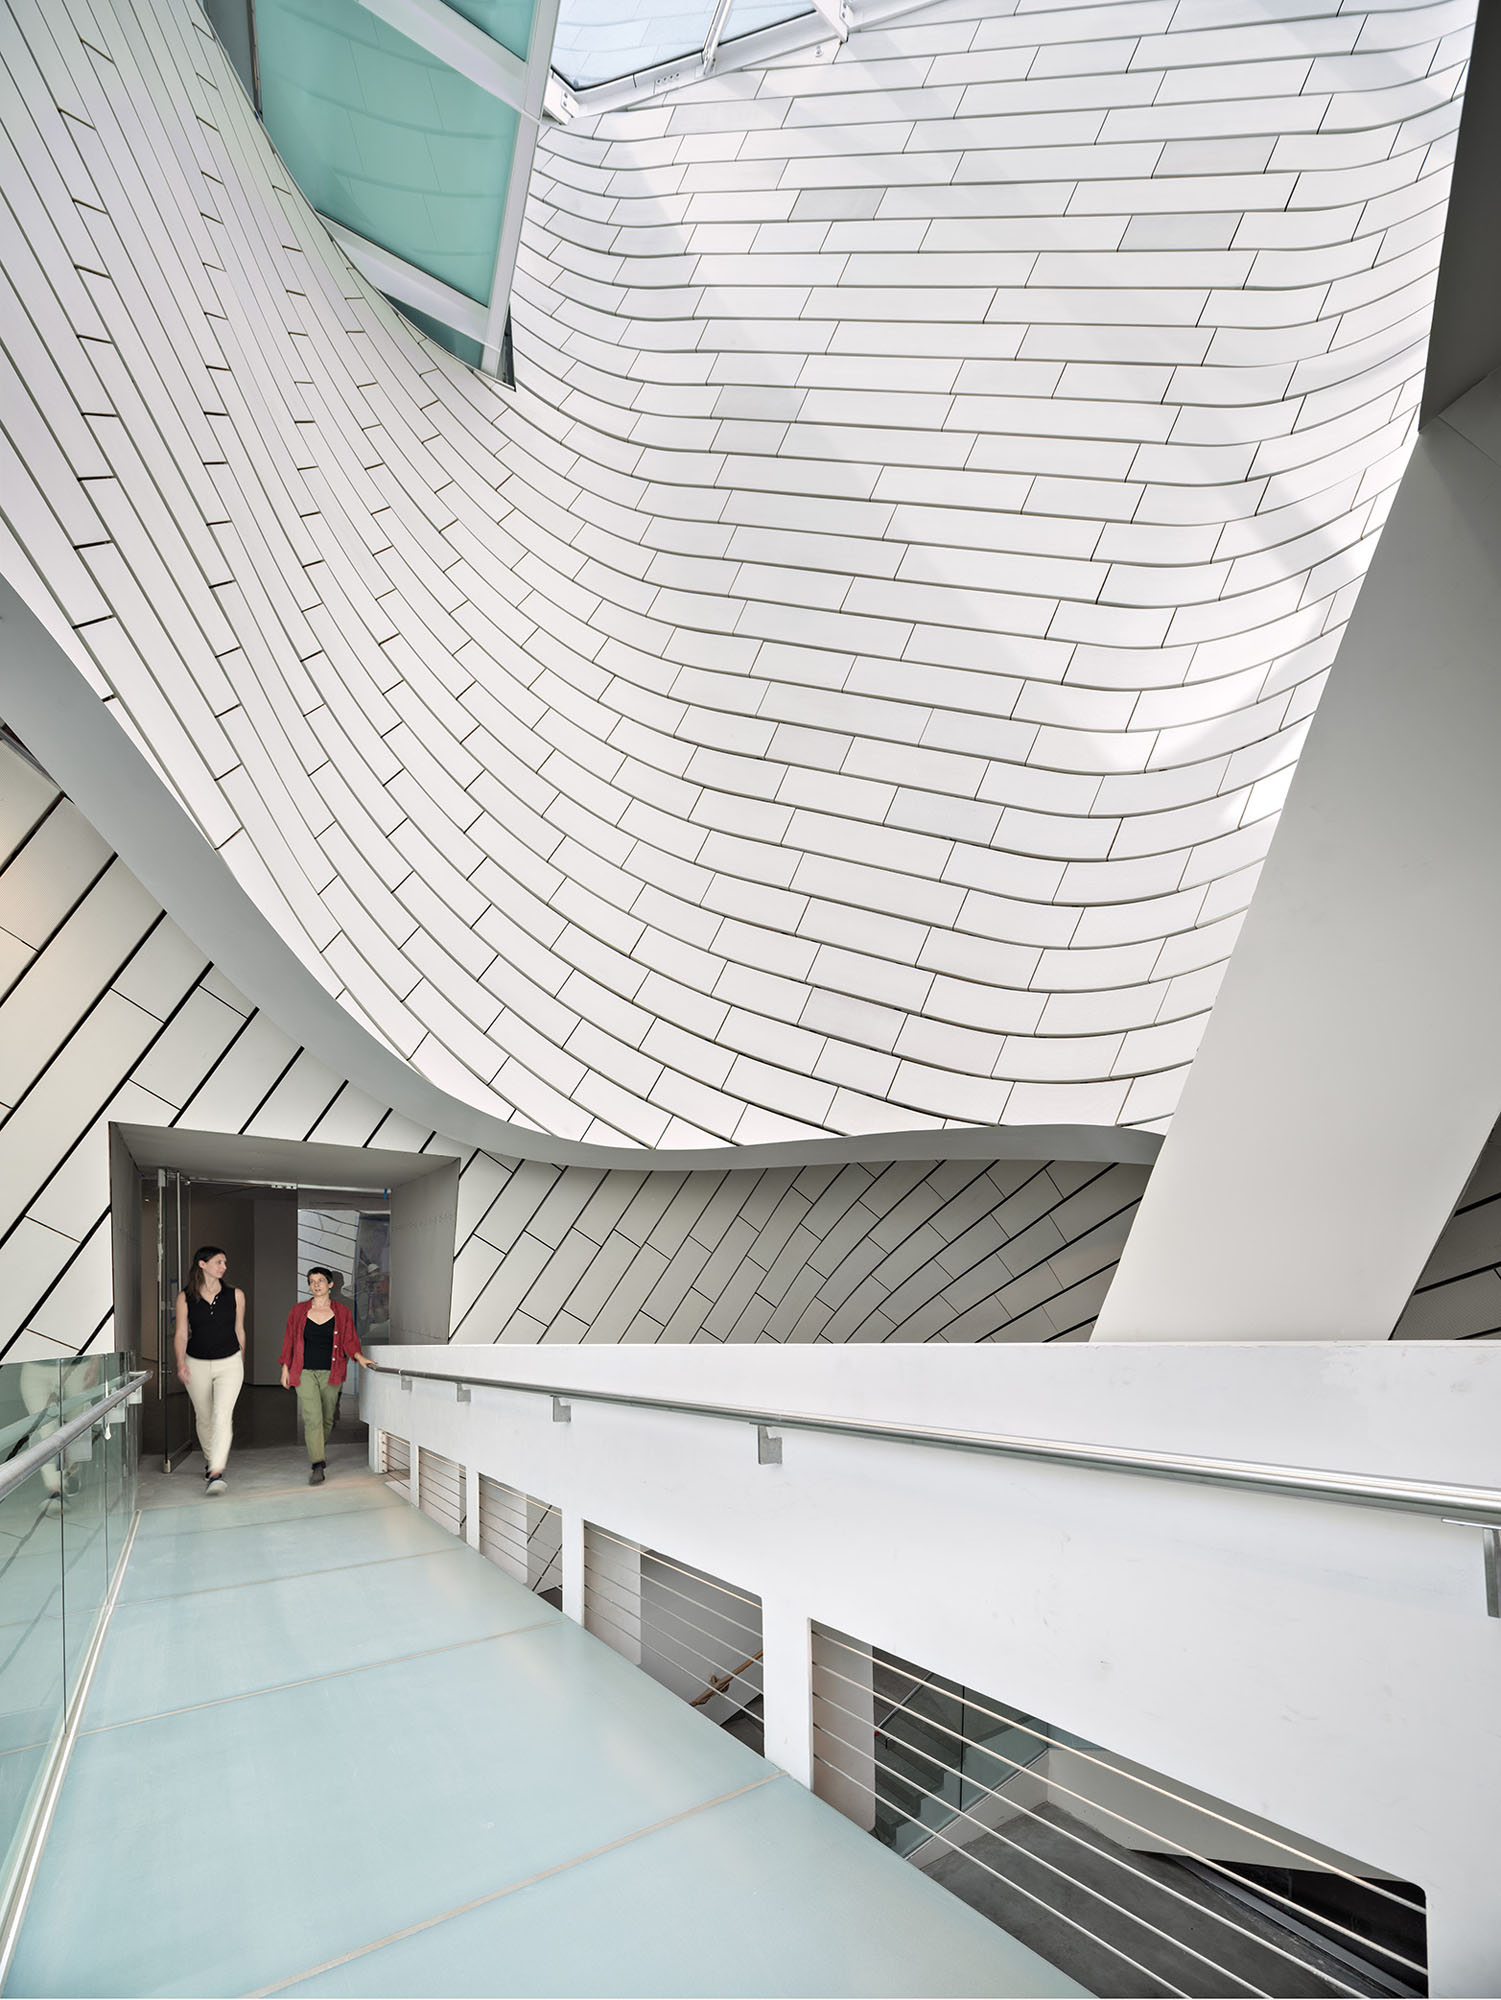 A view of the bridge across the atrium with white tile-clad walls